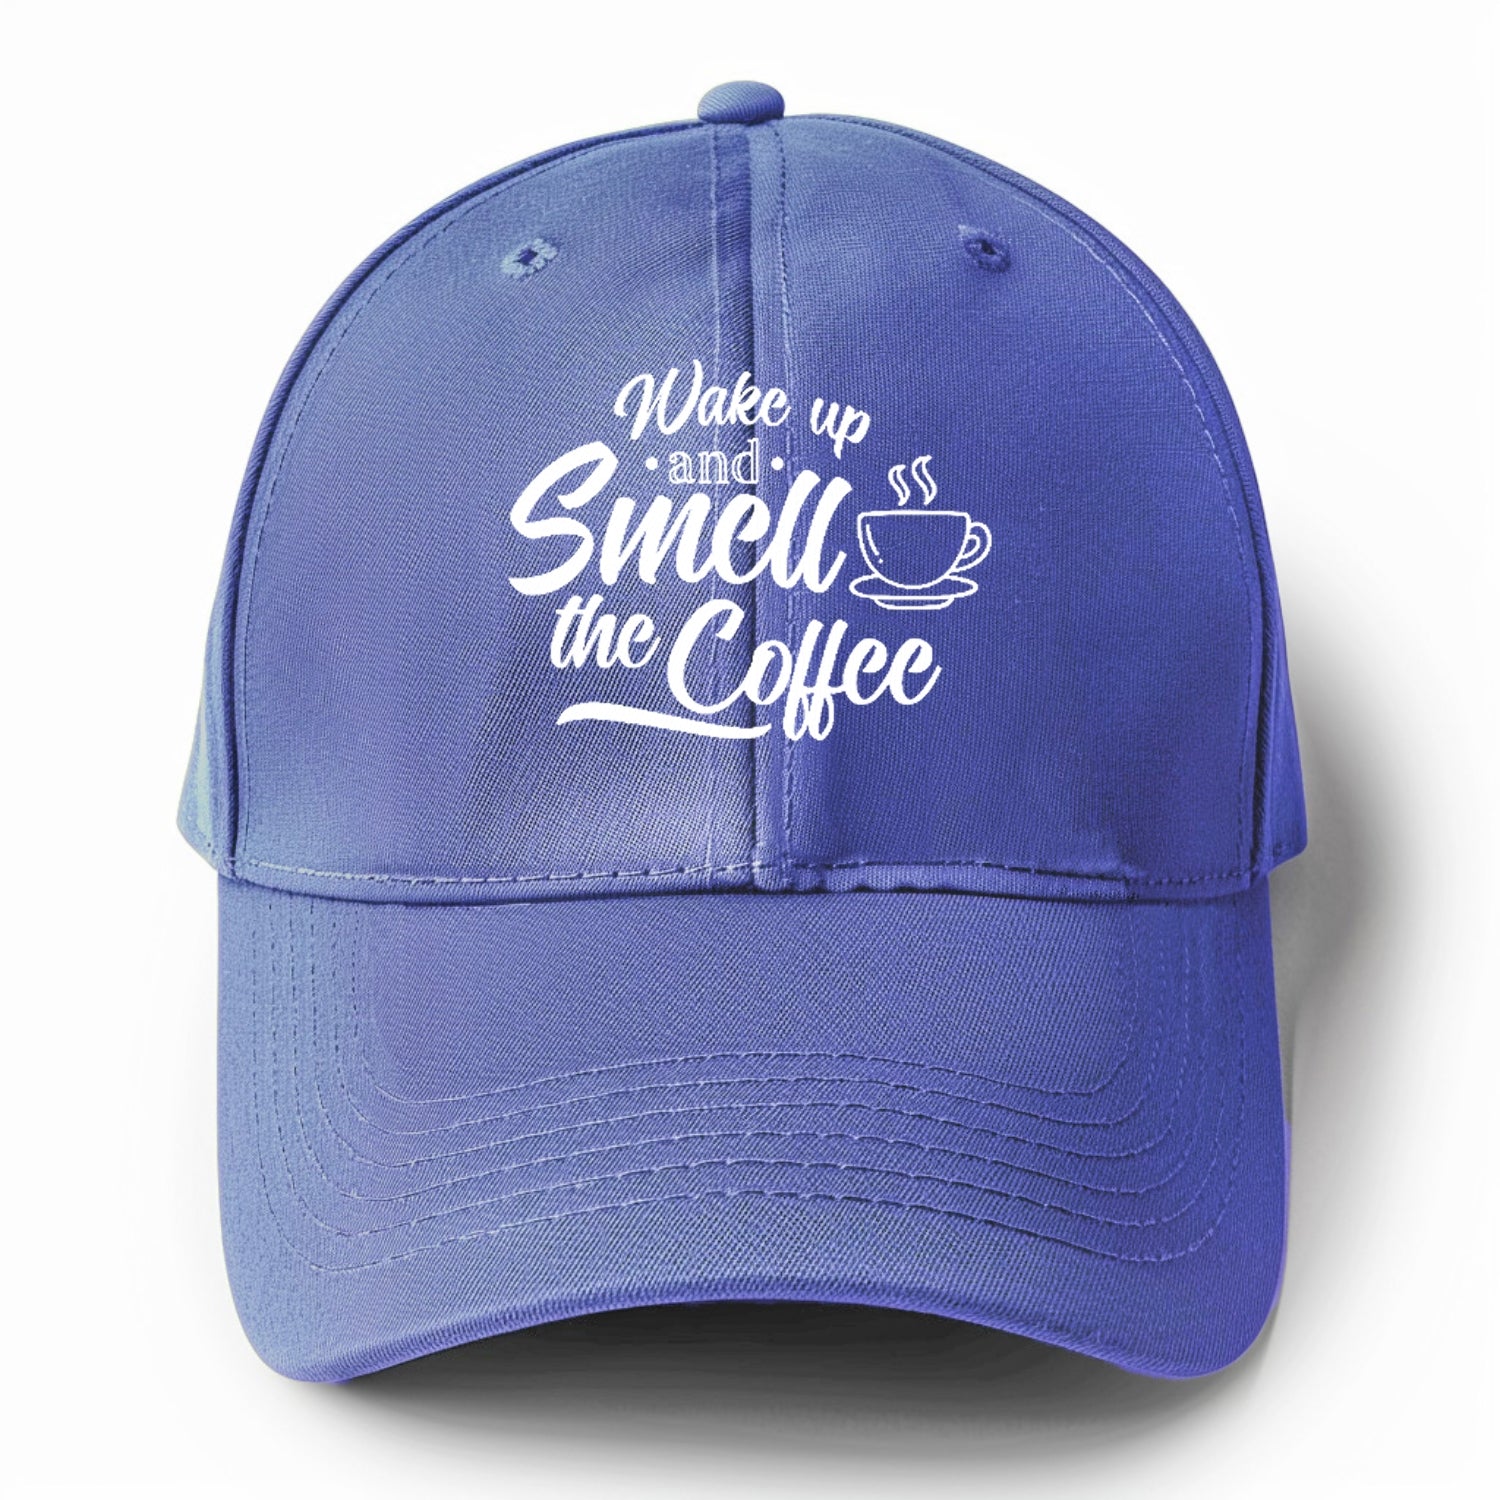 Caffeine Dream: Start Your Day with Bold 'Coffee' Vibes Hat